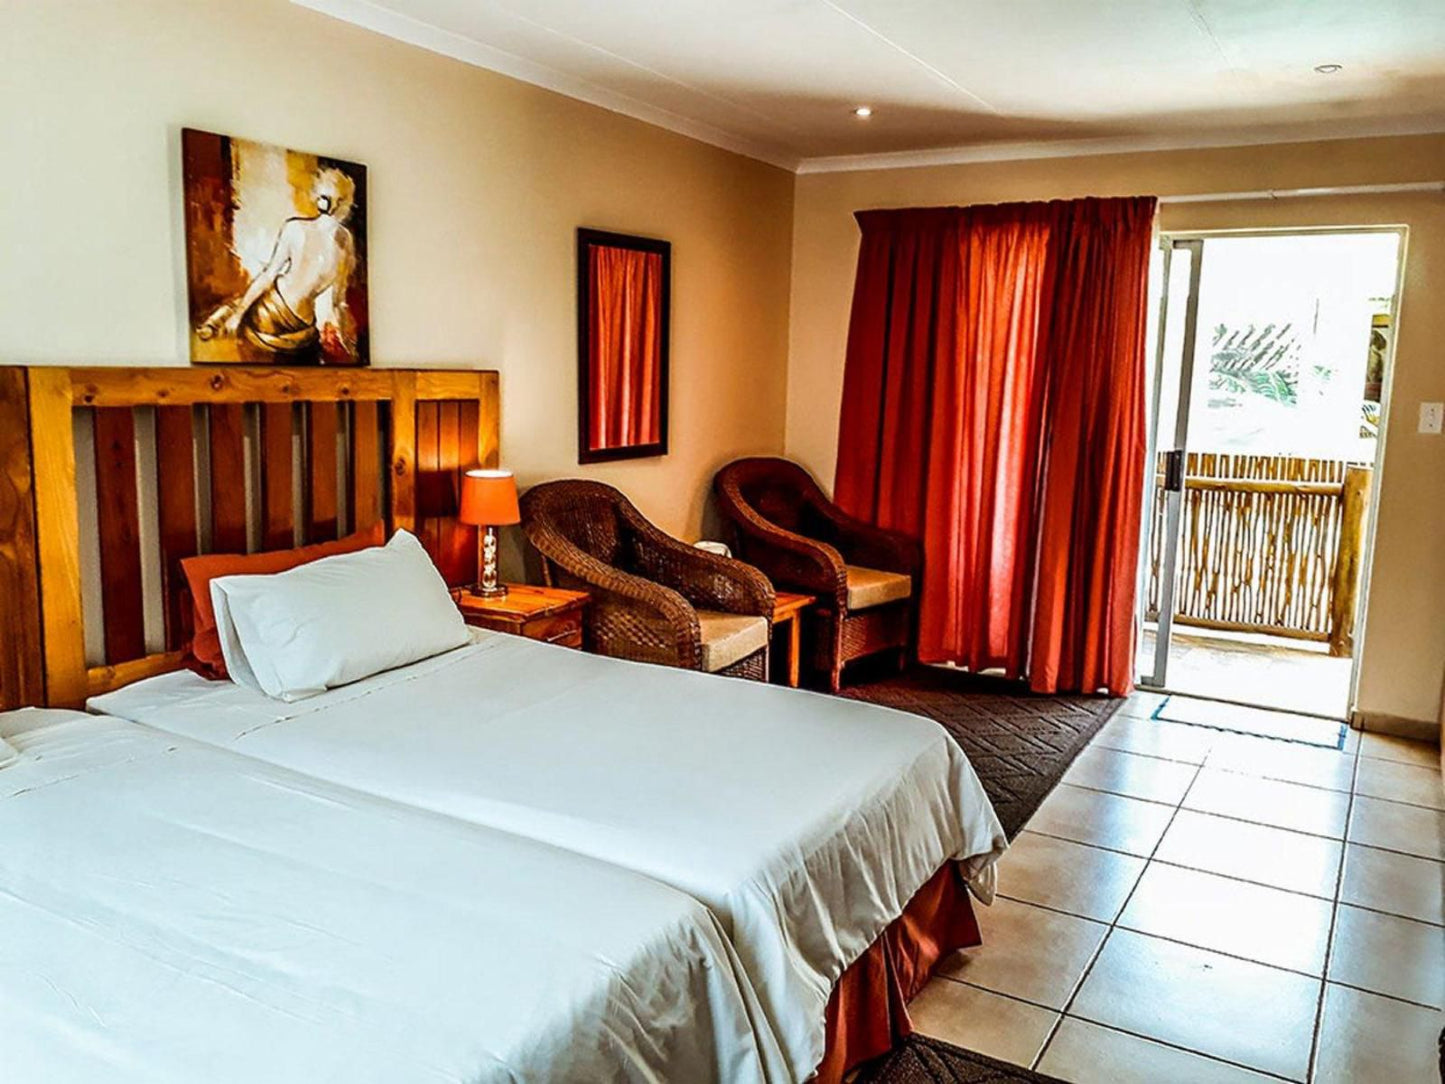 Mia Casa Guest House Mookgopong Naboomspruit Limpopo Province South Africa Bedroom